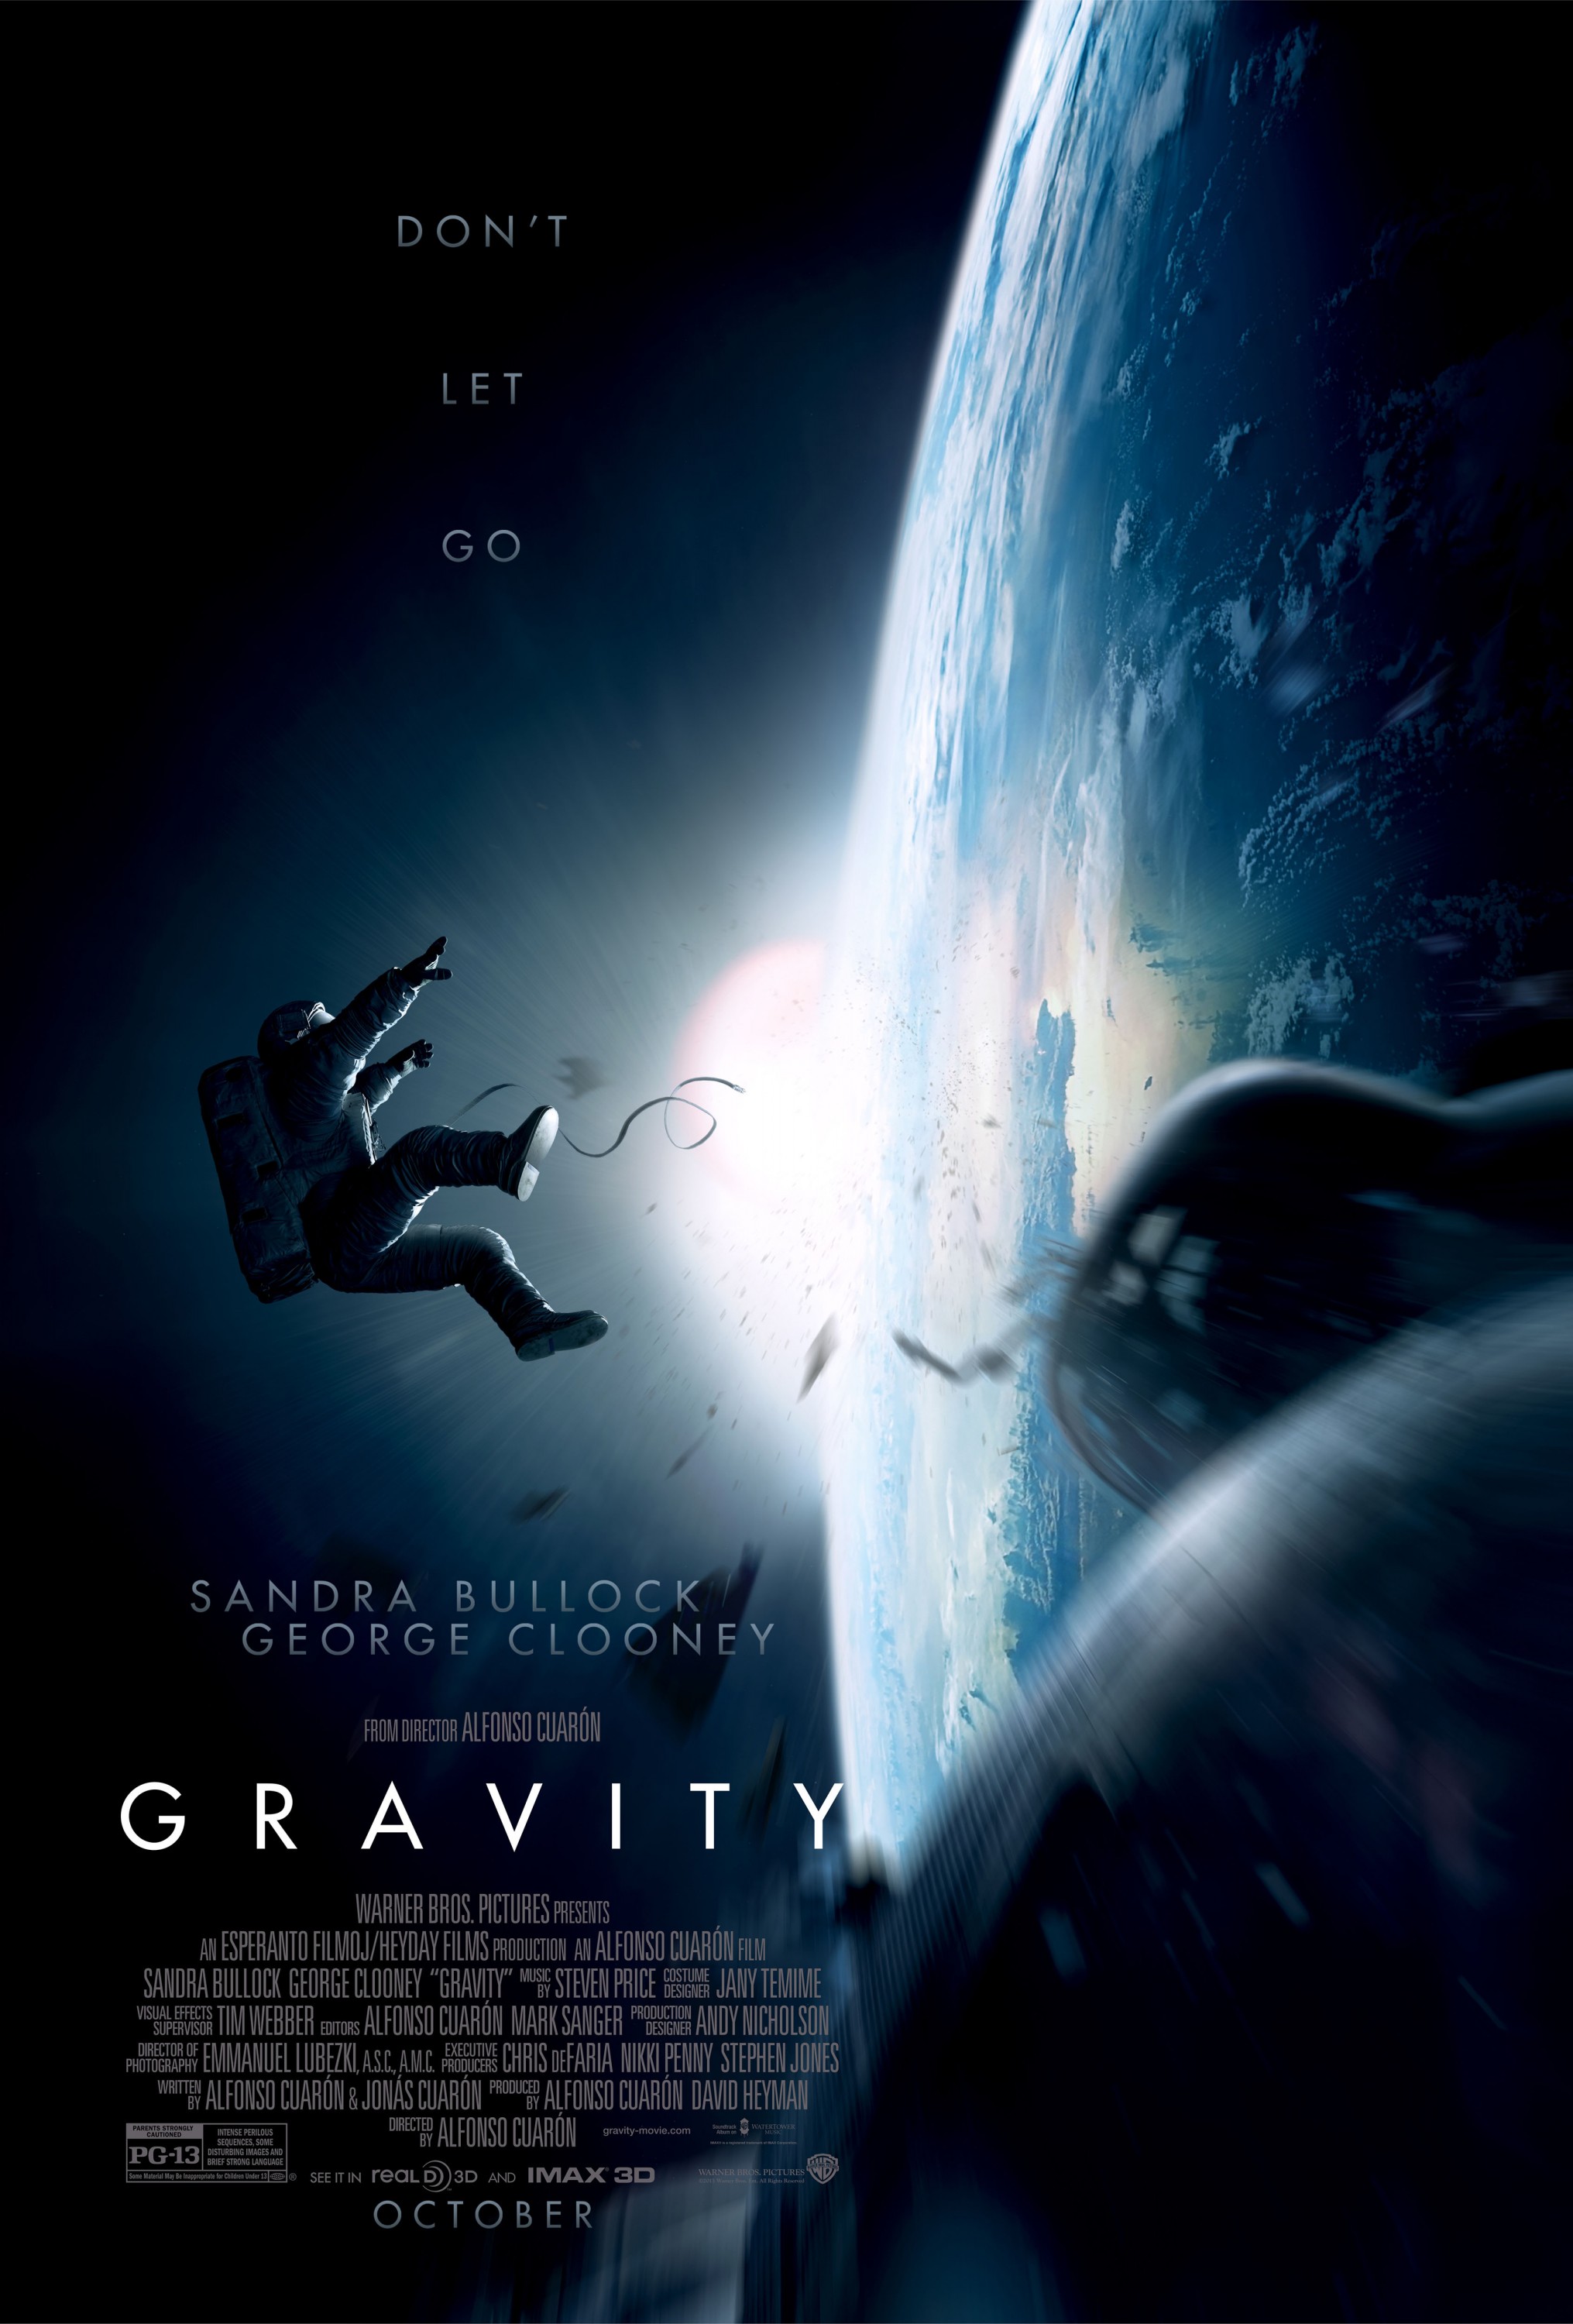 Poster for "Gravity"